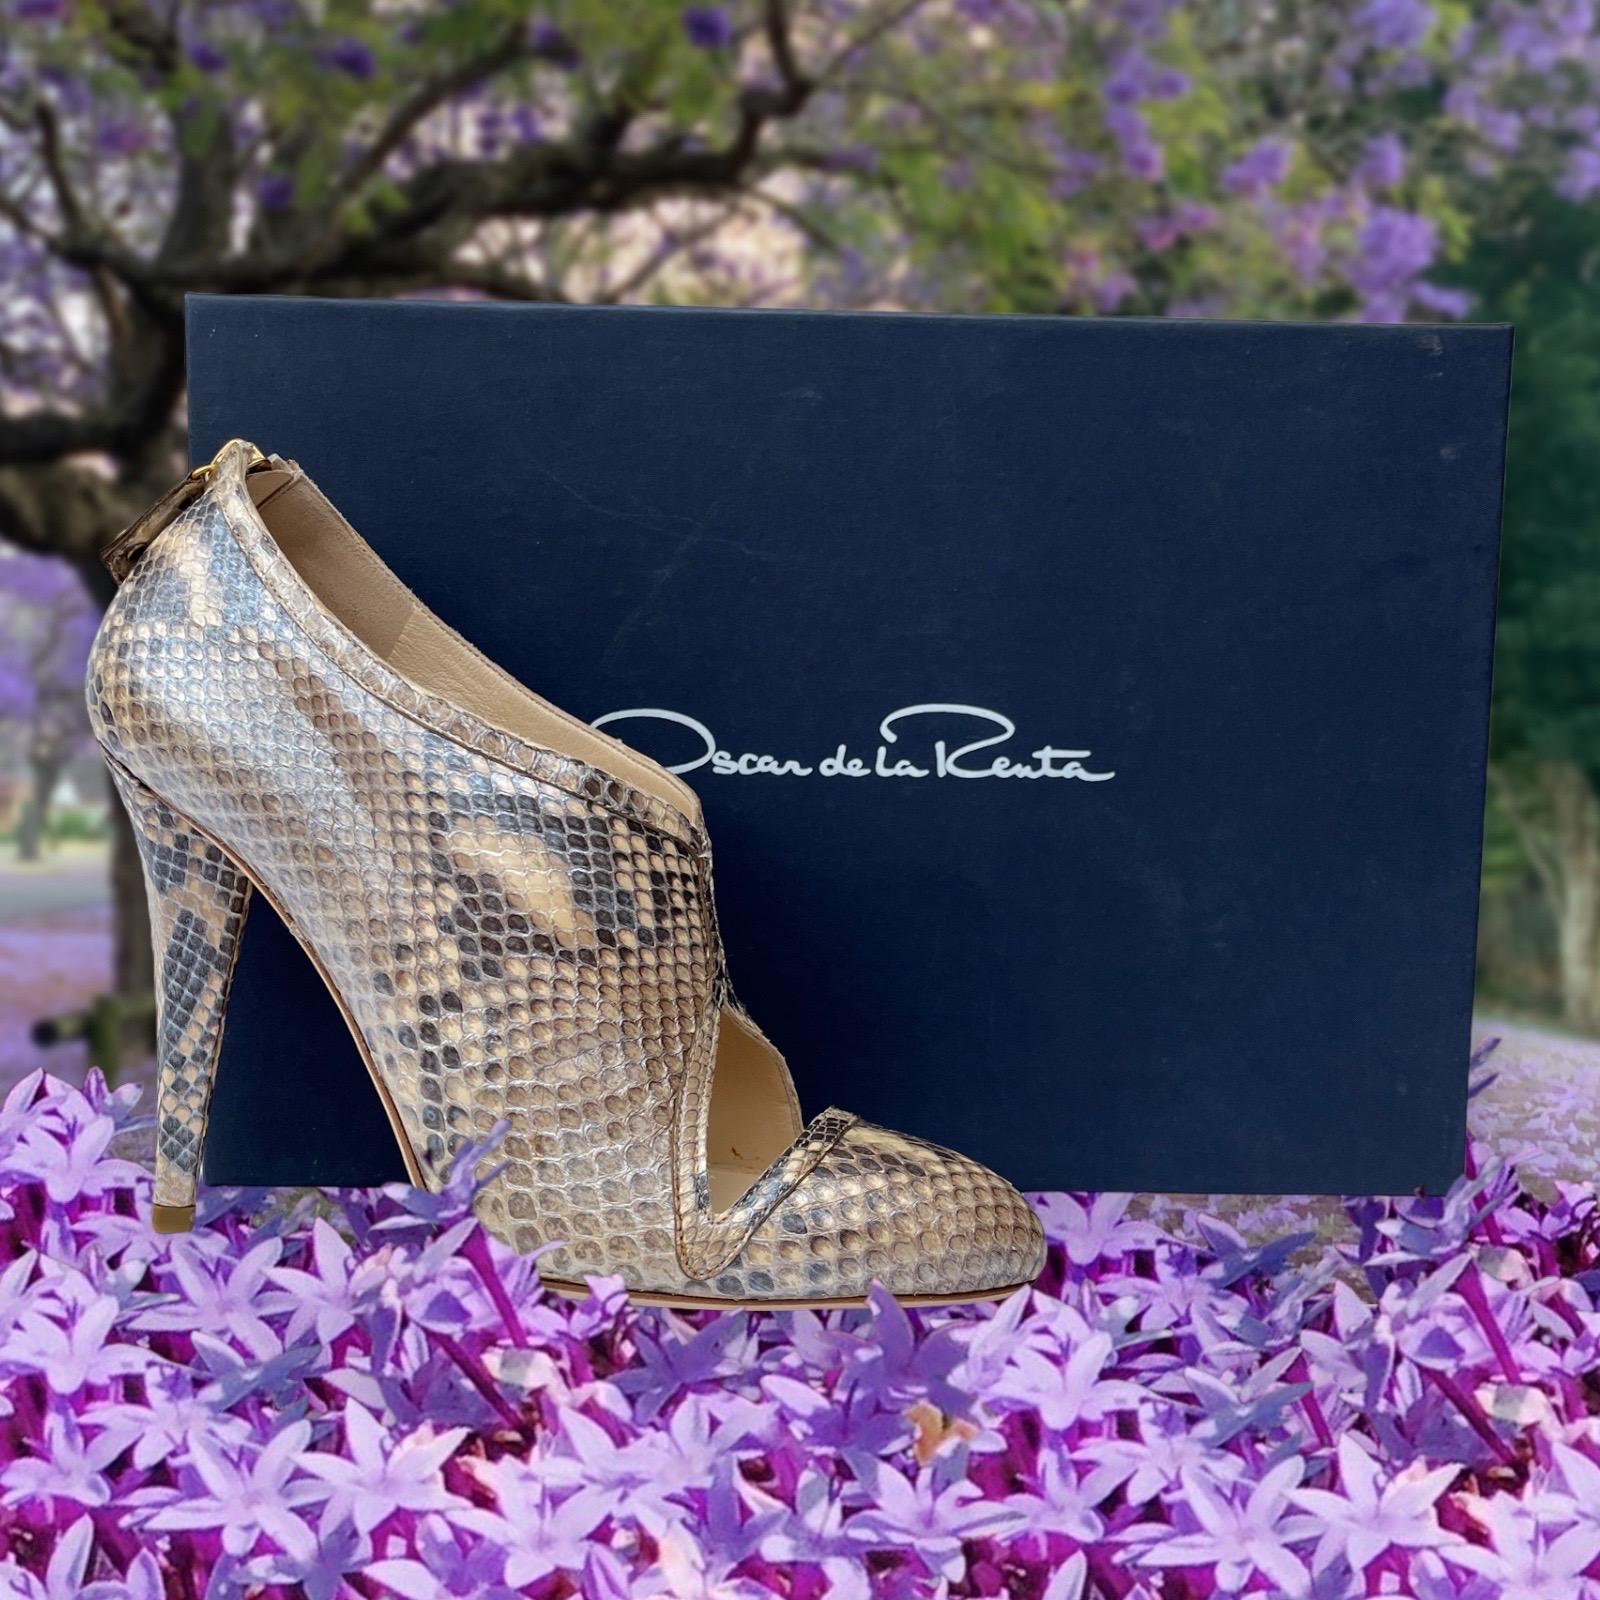 OSCAR DE LA RENTA

Snakeskin bootie with a heel that measures approximately 95mm. Oscar de la Renta shoes have curved cut out detailing at the front and gold tone zips up the back.
Genuine python skin
Gold tone zipper
Smooth leather lining
4 1/4